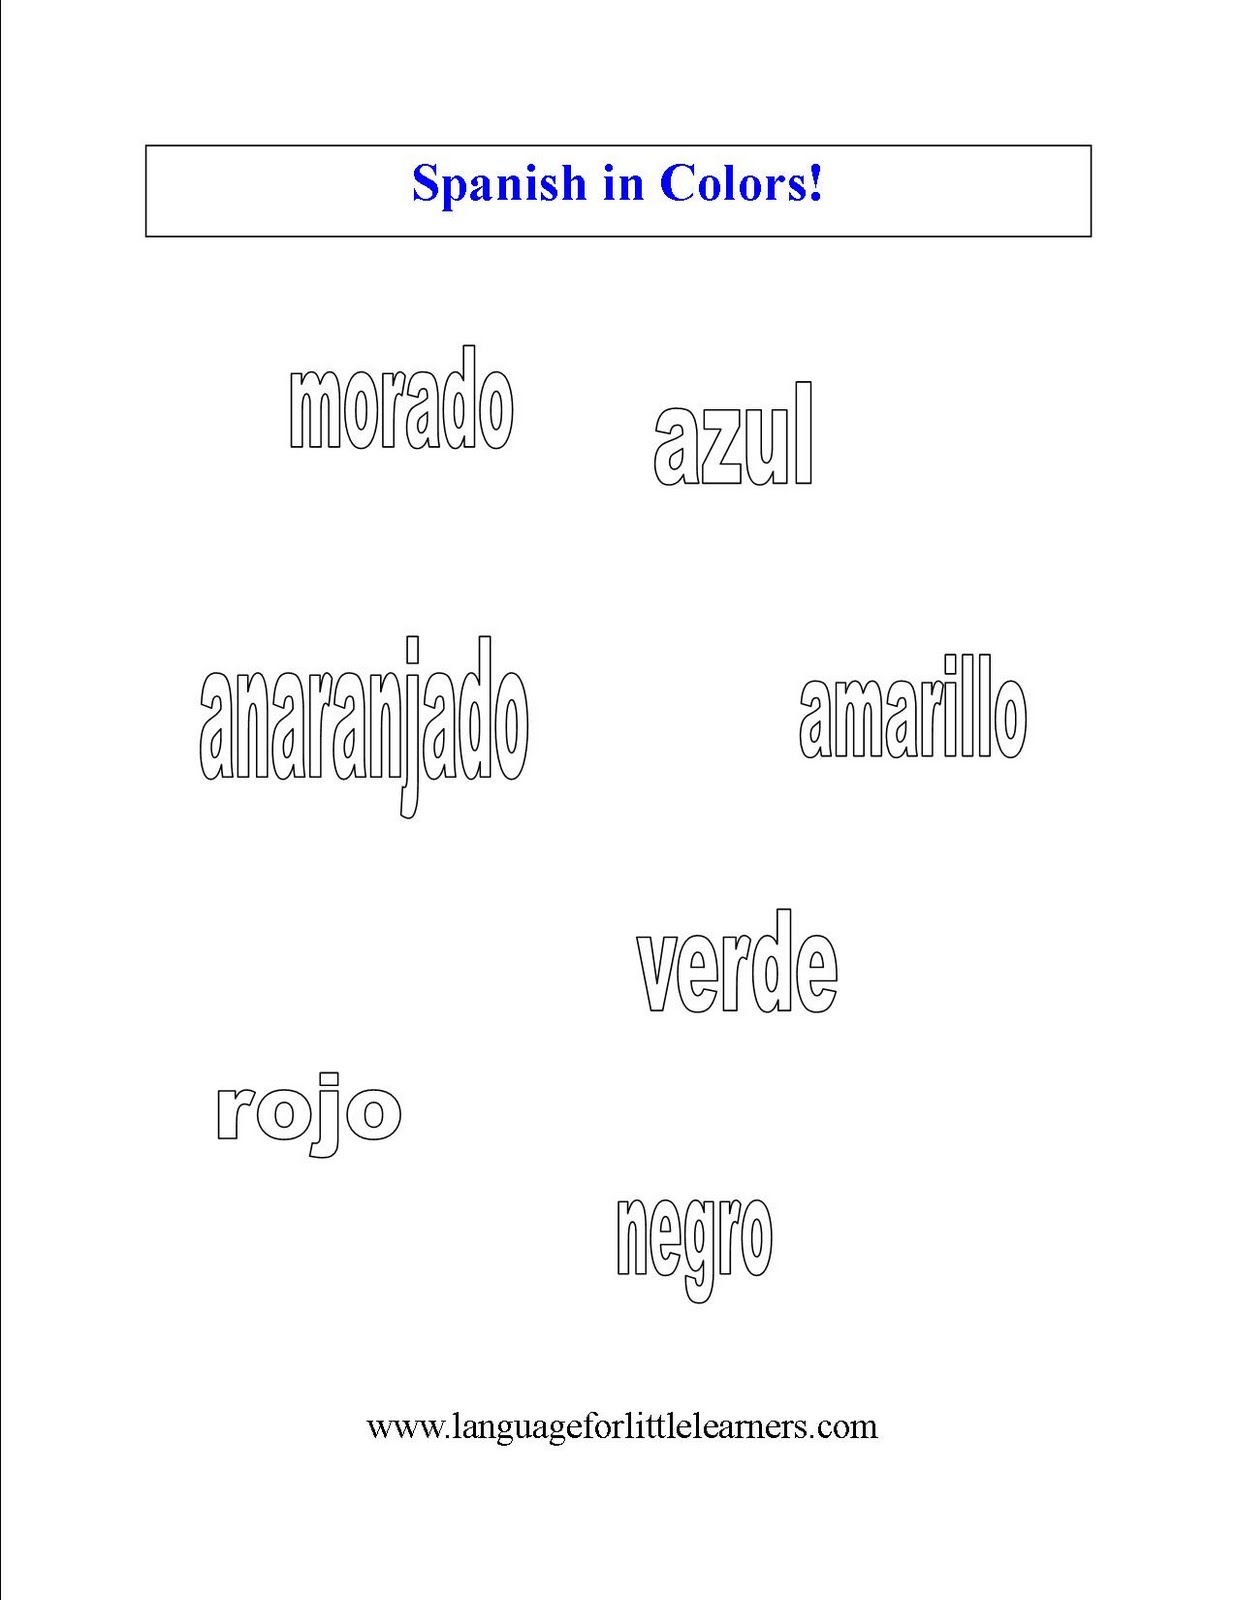 Spanish for Little Learners: Worksheet to Learn Colors in Spanish